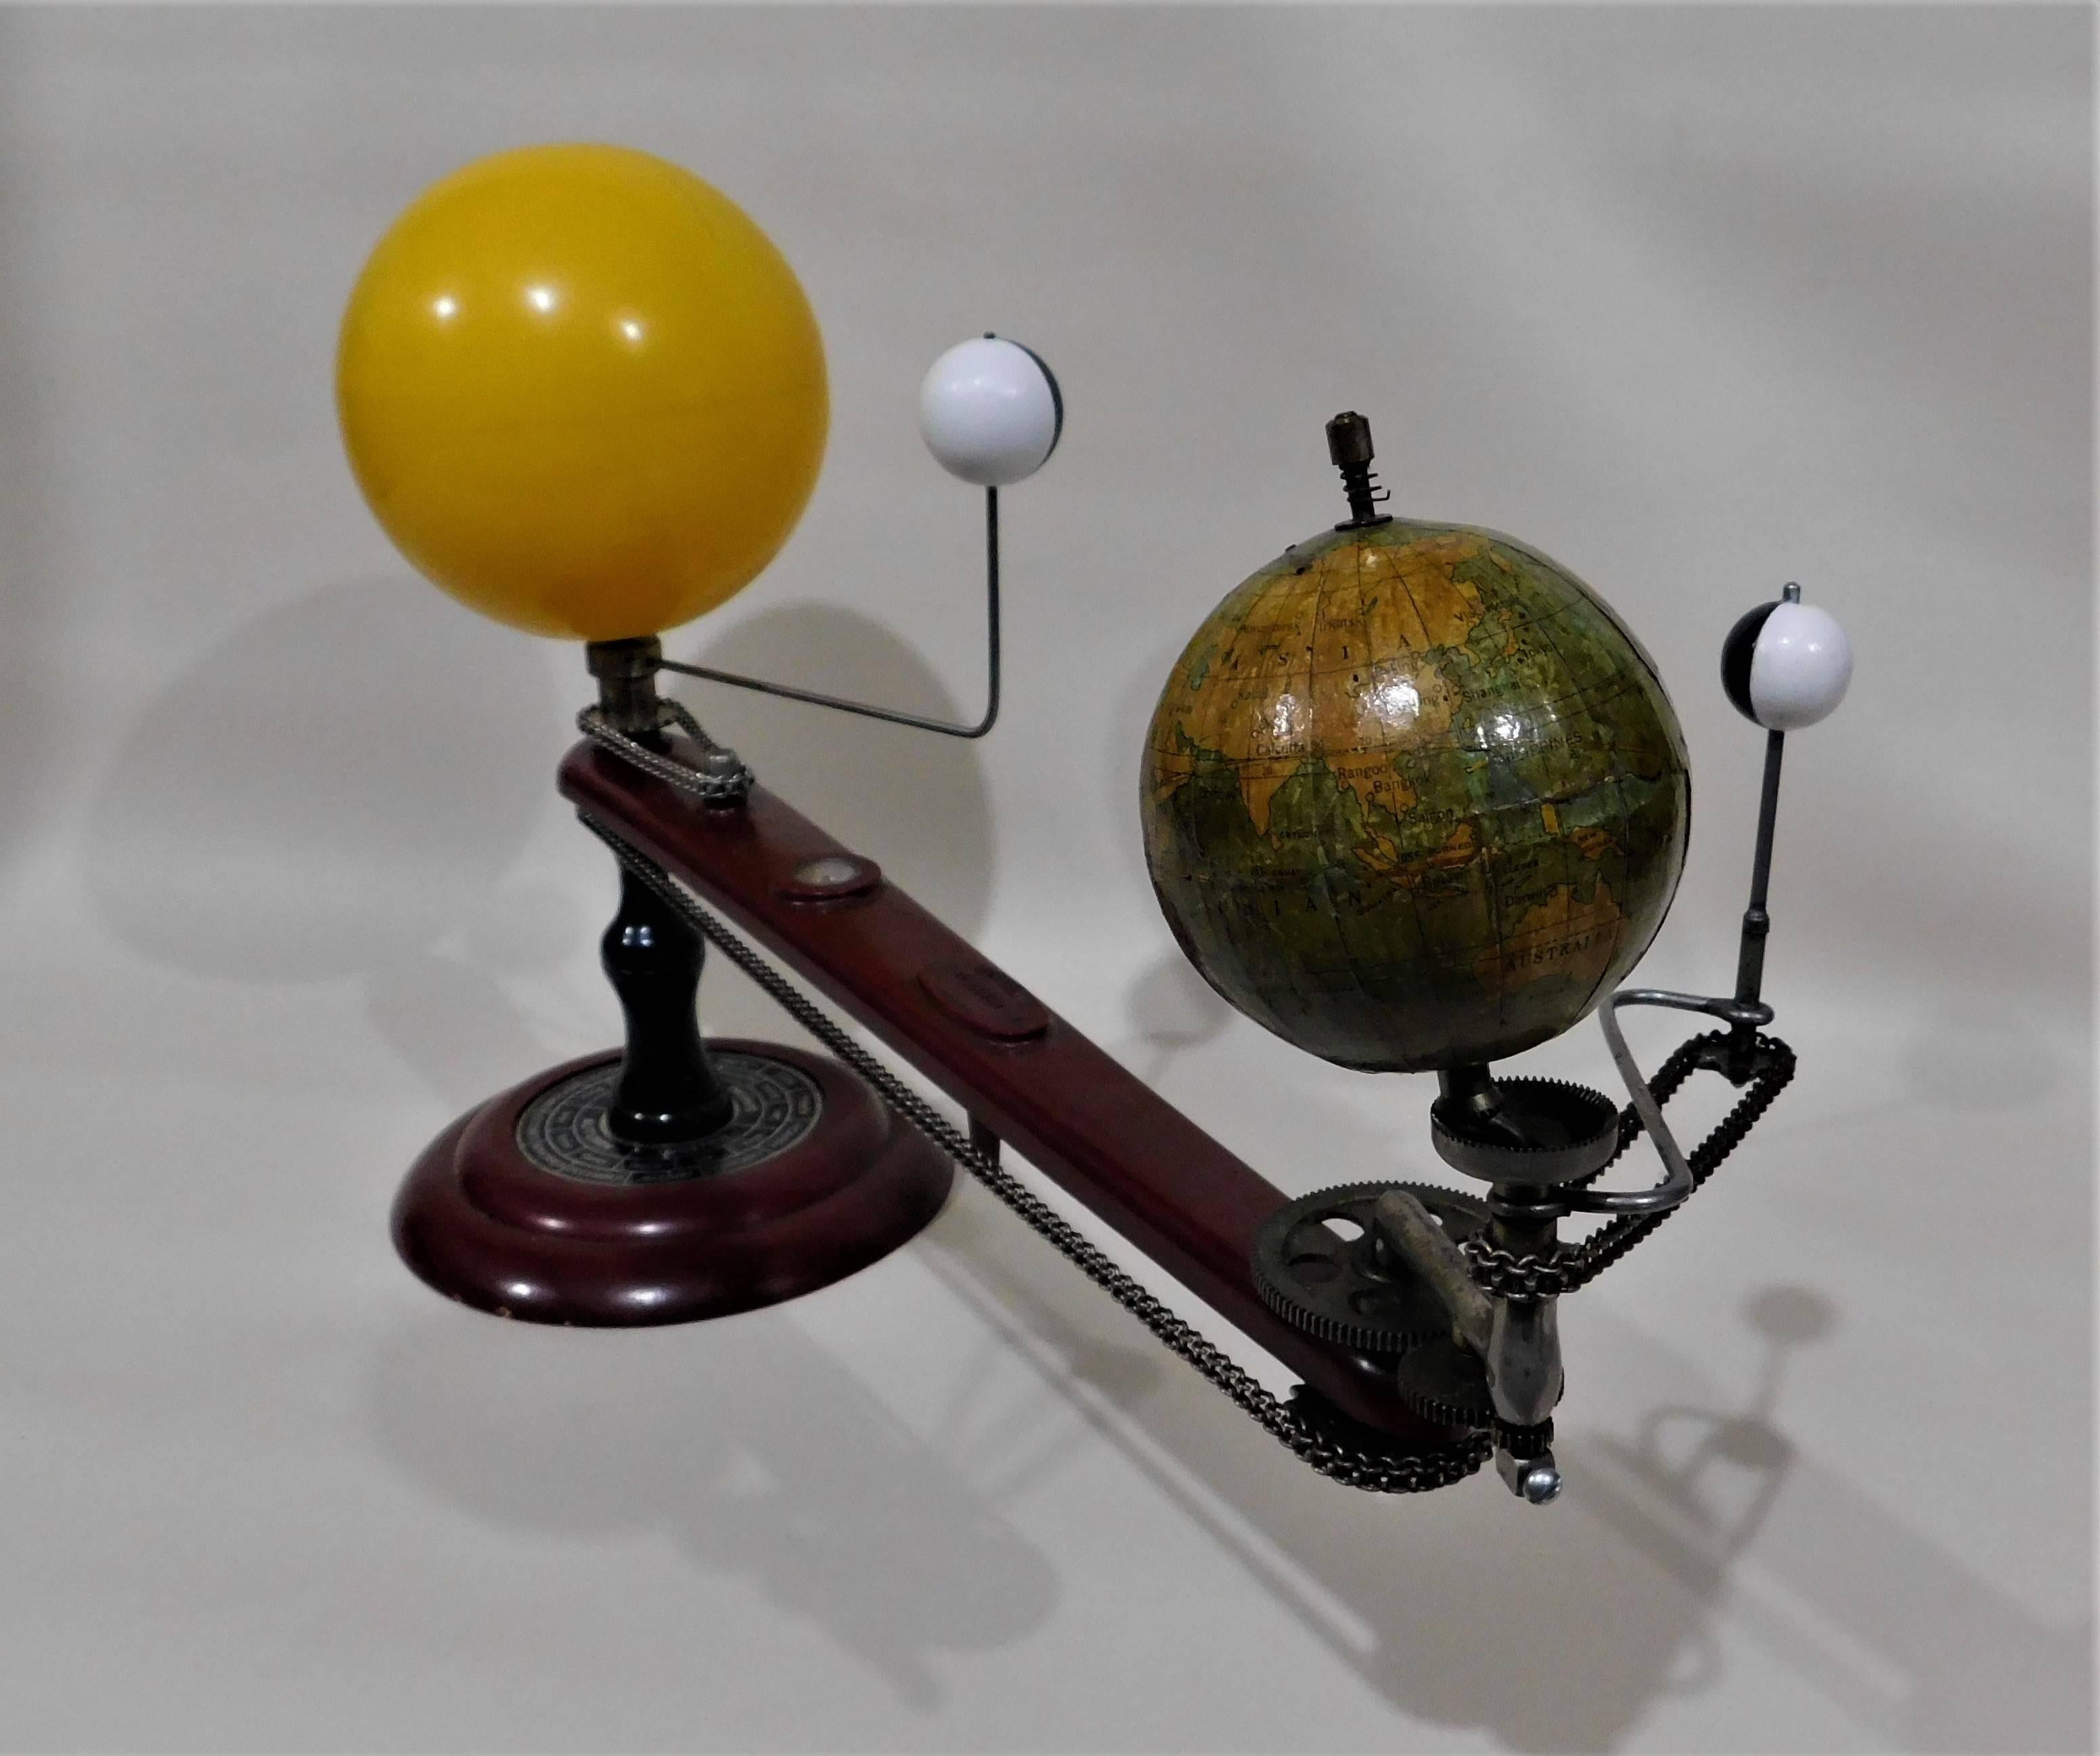 A geared tellurian by Trippensee Planetarium Co. Saginaw Michigan, is a demonstration model of the movement of the Earth, Moon and Venus relative to each other and to the sun. It shows such phenomena as the succession of seasons, and solar and lunar